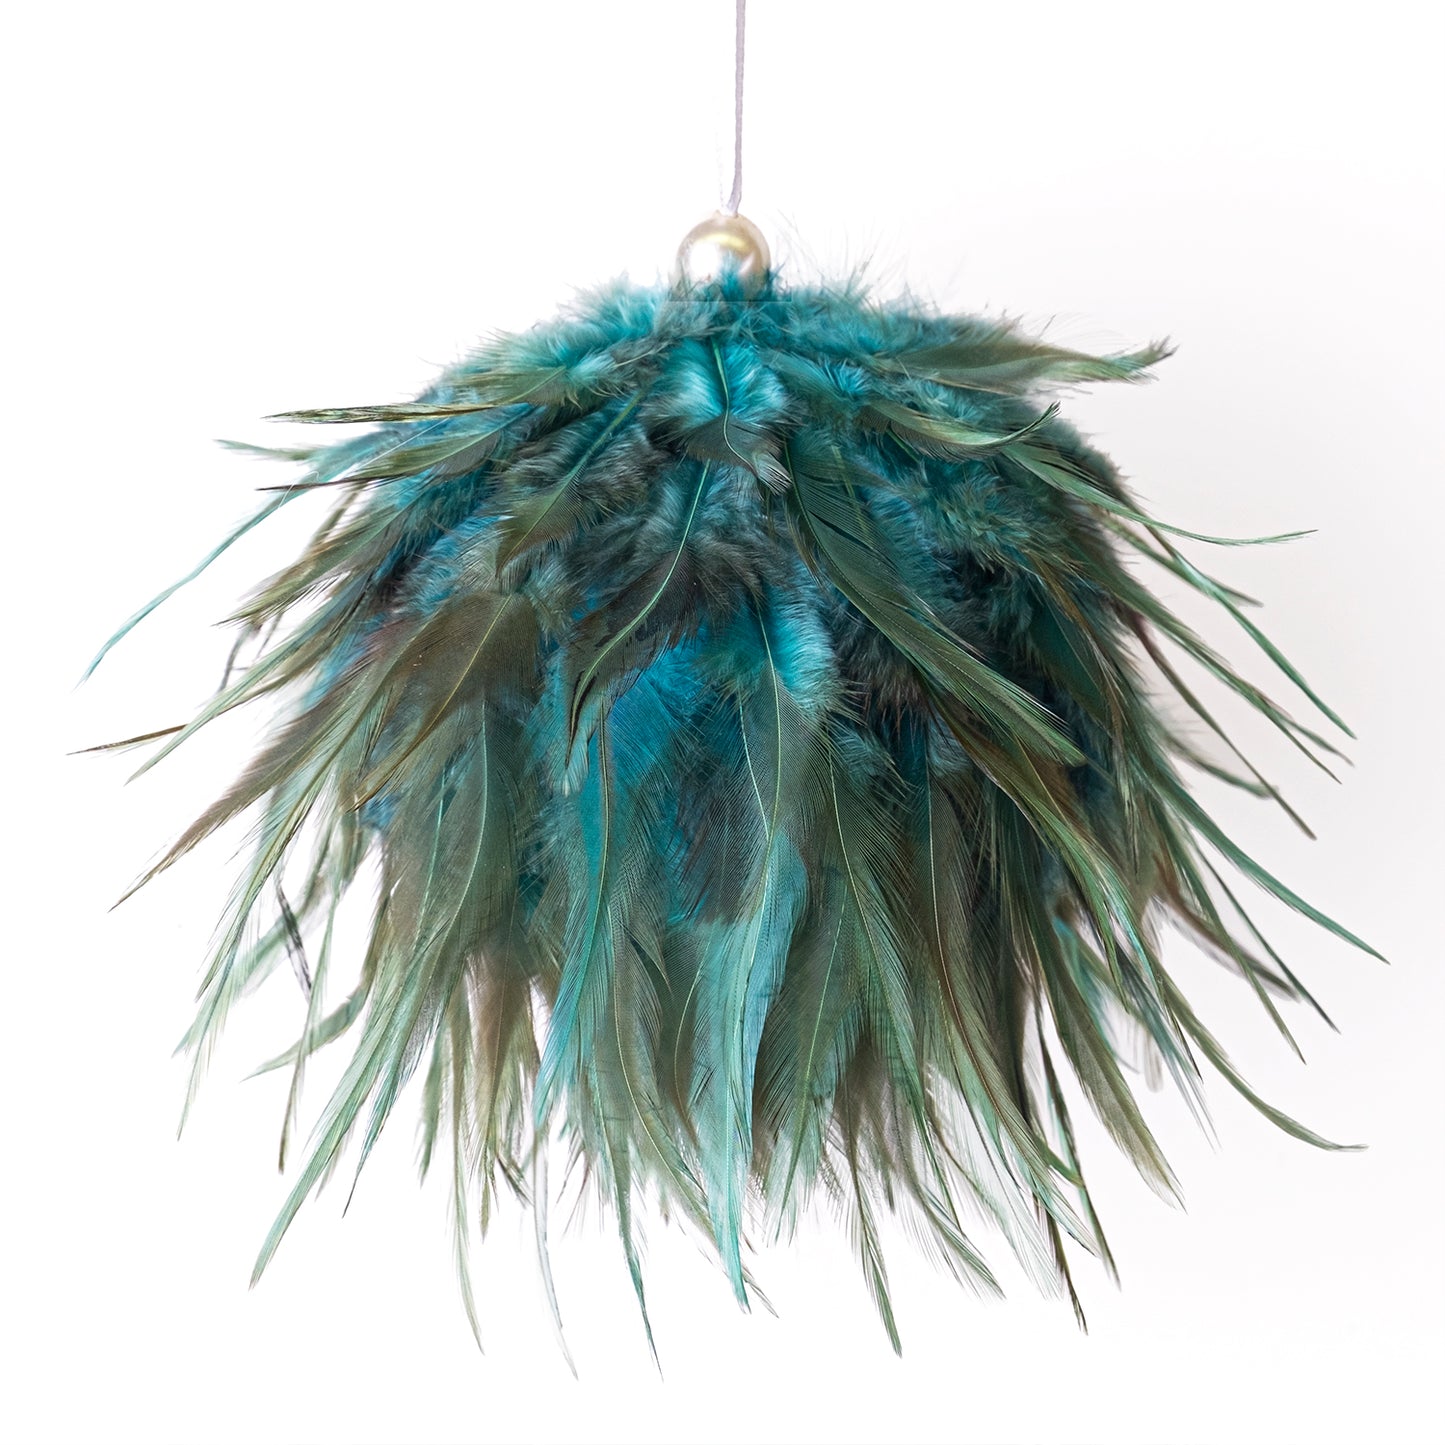 4″ PEACOCK FEATHERS ORNAMENT